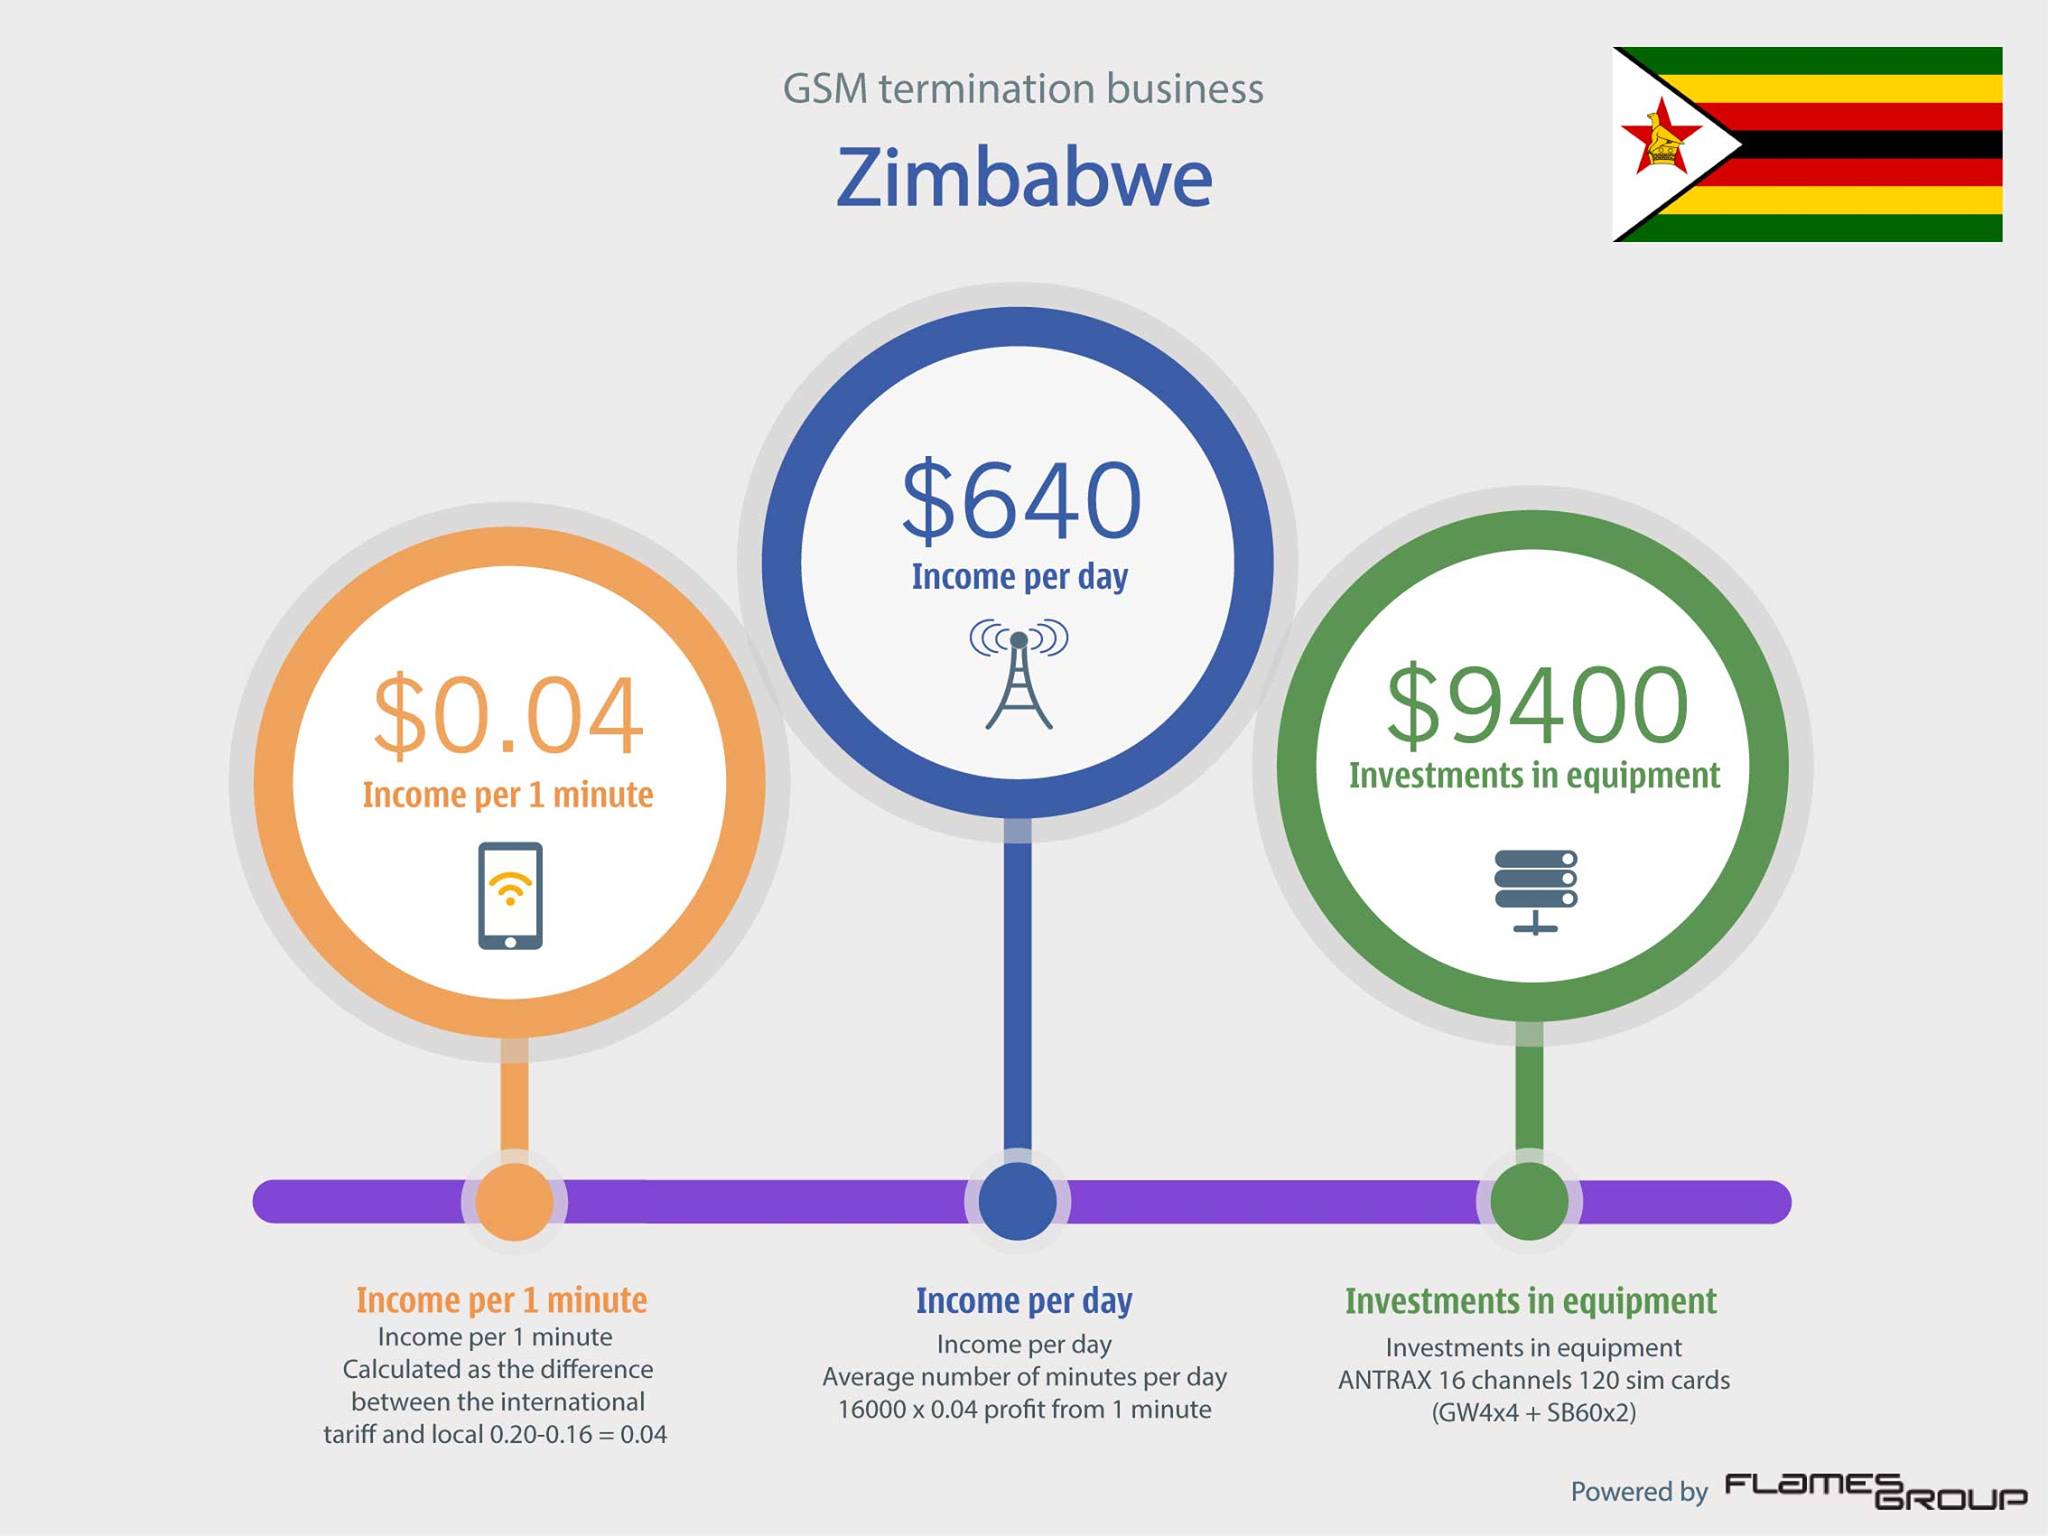 GSM termination in Zimbabwe - Infographic ANTRAX